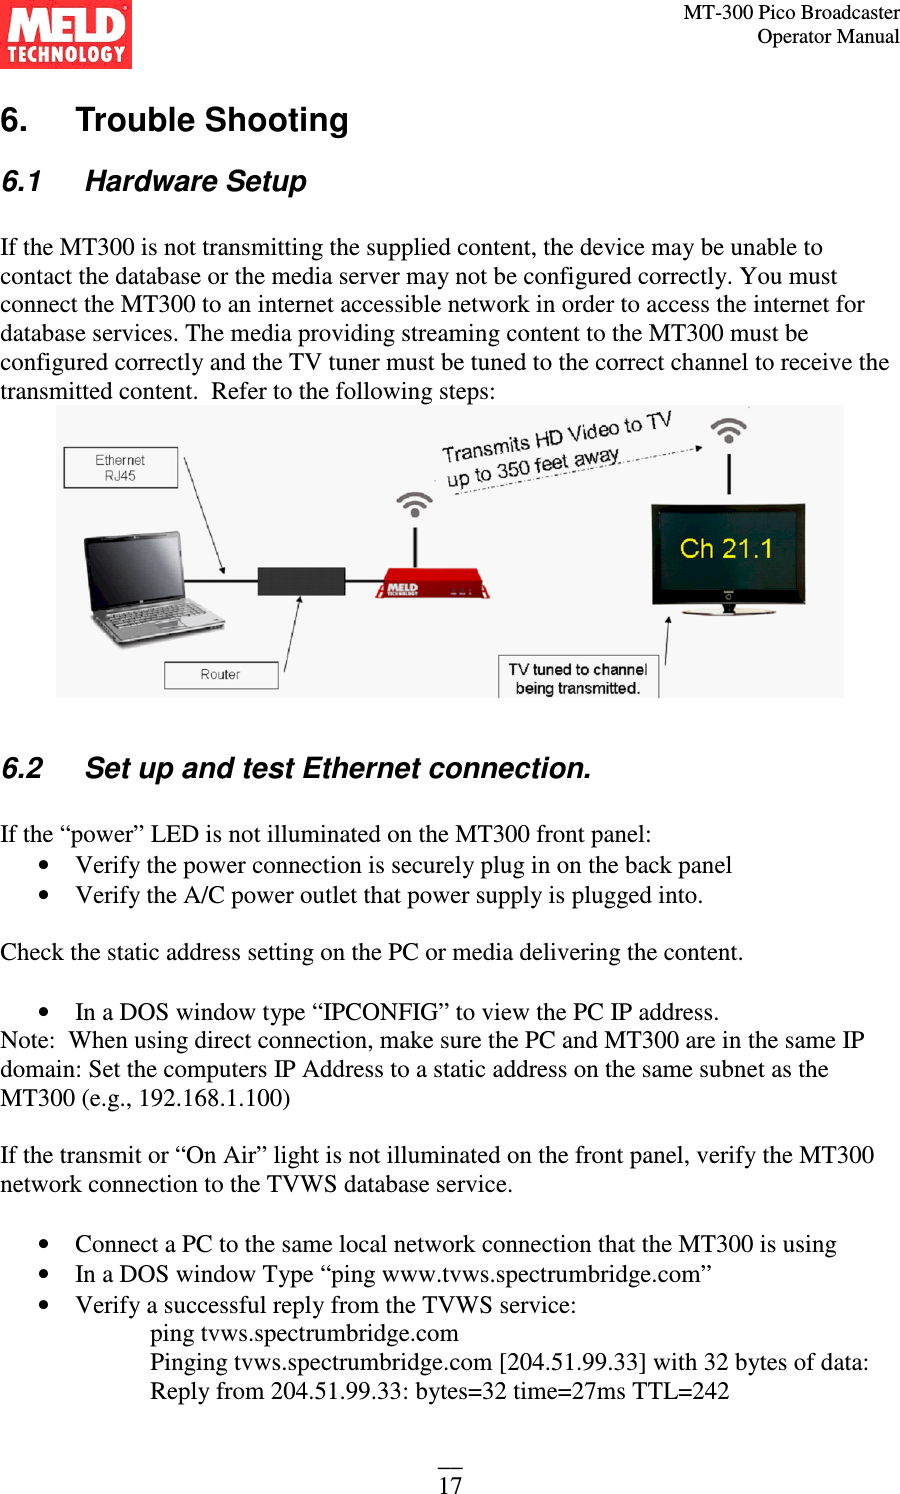 MT-300 Pico Broadcaster                                                                                                                                             Operator Manual __ 17 6.   Trouble Shooting 6.1   Hardware Setup  If the MT300 is not transmitting the supplied content, the device may be unable to contact the database or the media server may not be configured correctly. You must connect the MT300 to an internet accessible network in order to access the internet for database services. The media providing streaming content to the MT300 must be configured correctly and the TV tuner must be tuned to the correct channel to receive the transmitted content.  Refer to the following steps:   6.2   Set up and test Ethernet connection.  If the “power” LED is not illuminated on the MT300 front panel: • Verify the power connection is securely plug in on the back panel • Verify the A/C power outlet that power supply is plugged into.  Check the static address setting on the PC or media delivering the content.   • In a DOS window type “IPCONFIG” to view the PC IP address.  Note:  When using direct connection, make sure the PC and MT300 are in the same IP domain: Set the computers IP Address to a static address on the same subnet as the MT300 (e.g., 192.168.1.100)  If the transmit or “On Air” light is not illuminated on the front panel, verify the MT300 network connection to the TVWS database service.  • Connect a PC to the same local network connection that the MT300 is using • In a DOS window Type “ping www.tvws.spectrumbridge.com” • Verify a successful reply from the TVWS service: ping tvws.spectrumbridge.com Pinging tvws.spectrumbridge.com [204.51.99.33] with 32 bytes of data: Reply from 204.51.99.33: bytes=32 time=27ms TTL=242 